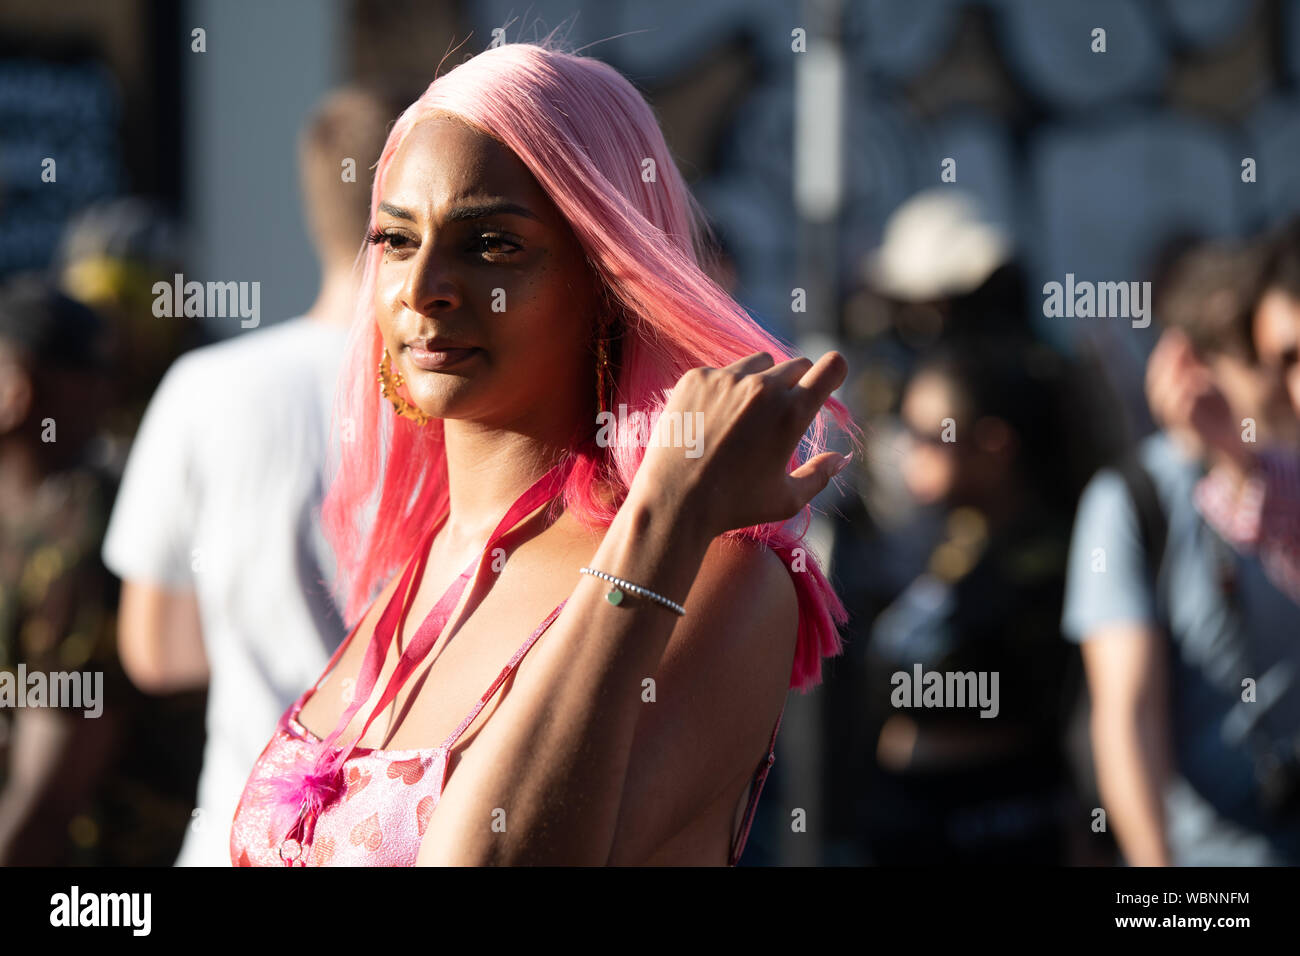 a woman with pink hair attending the Notting Hill Carnival. Stock Photo